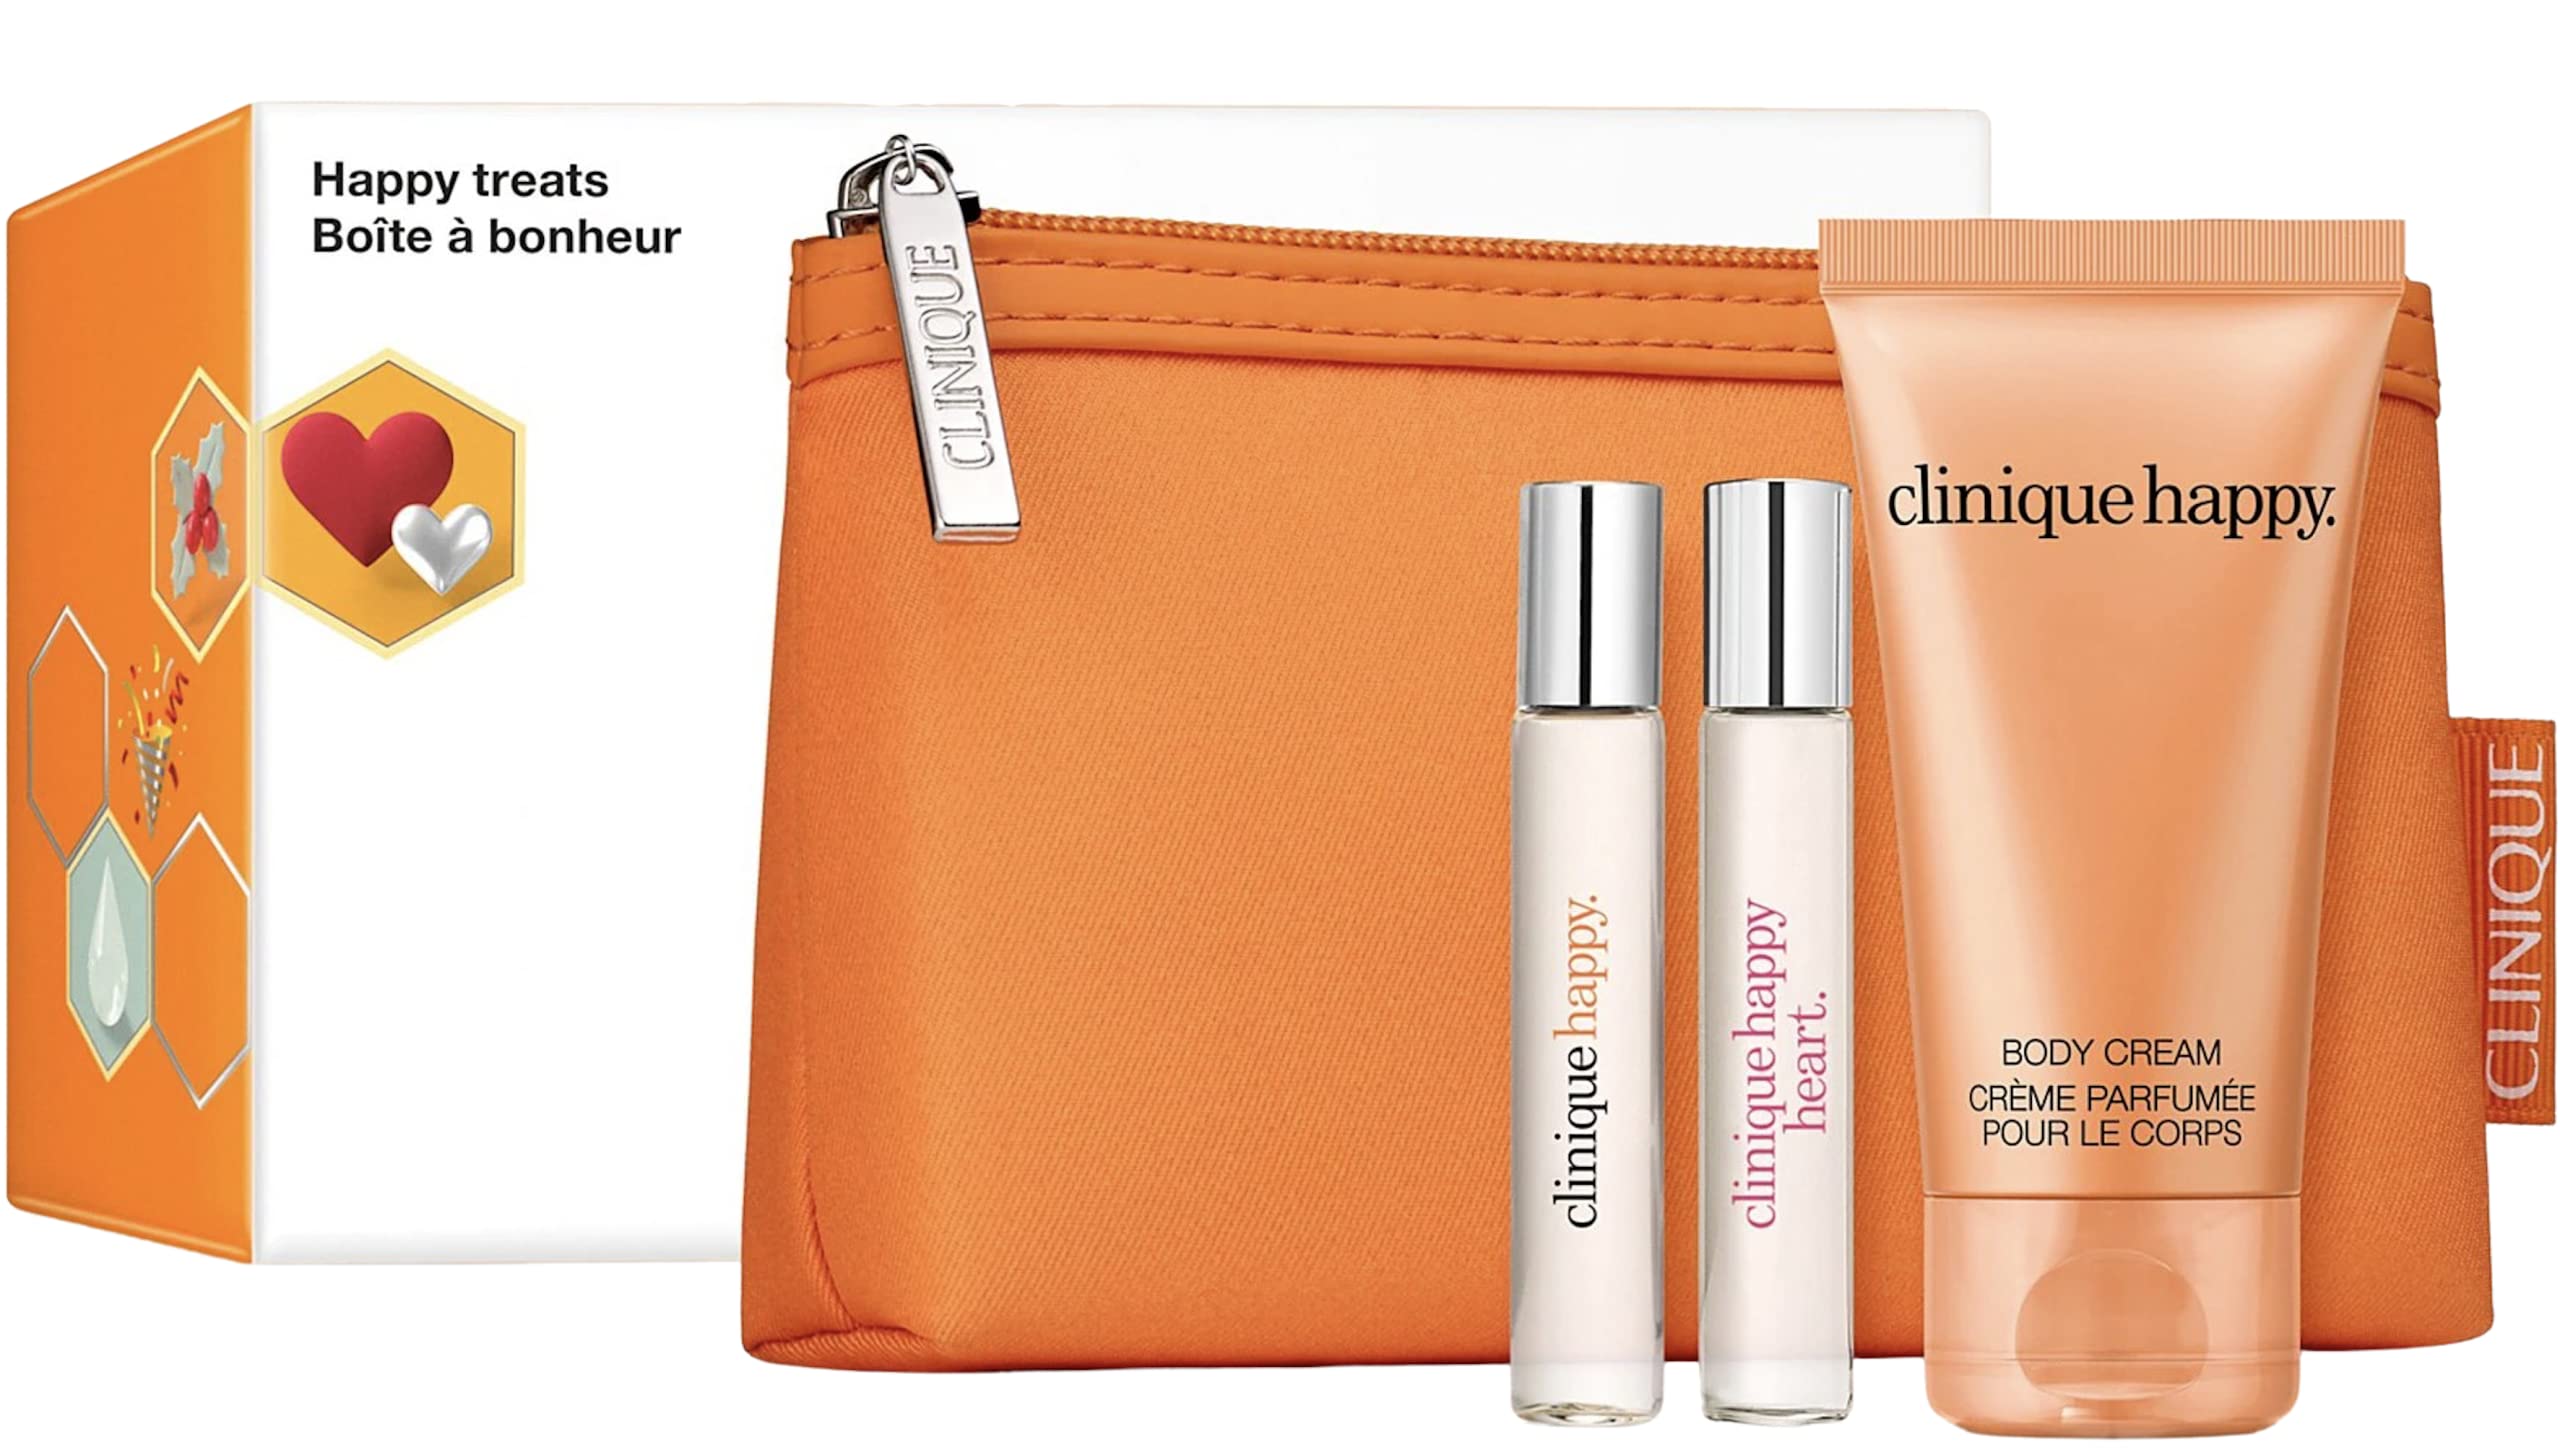 Clinique Limited Edition Happy Treats 4 Piece Gift Set